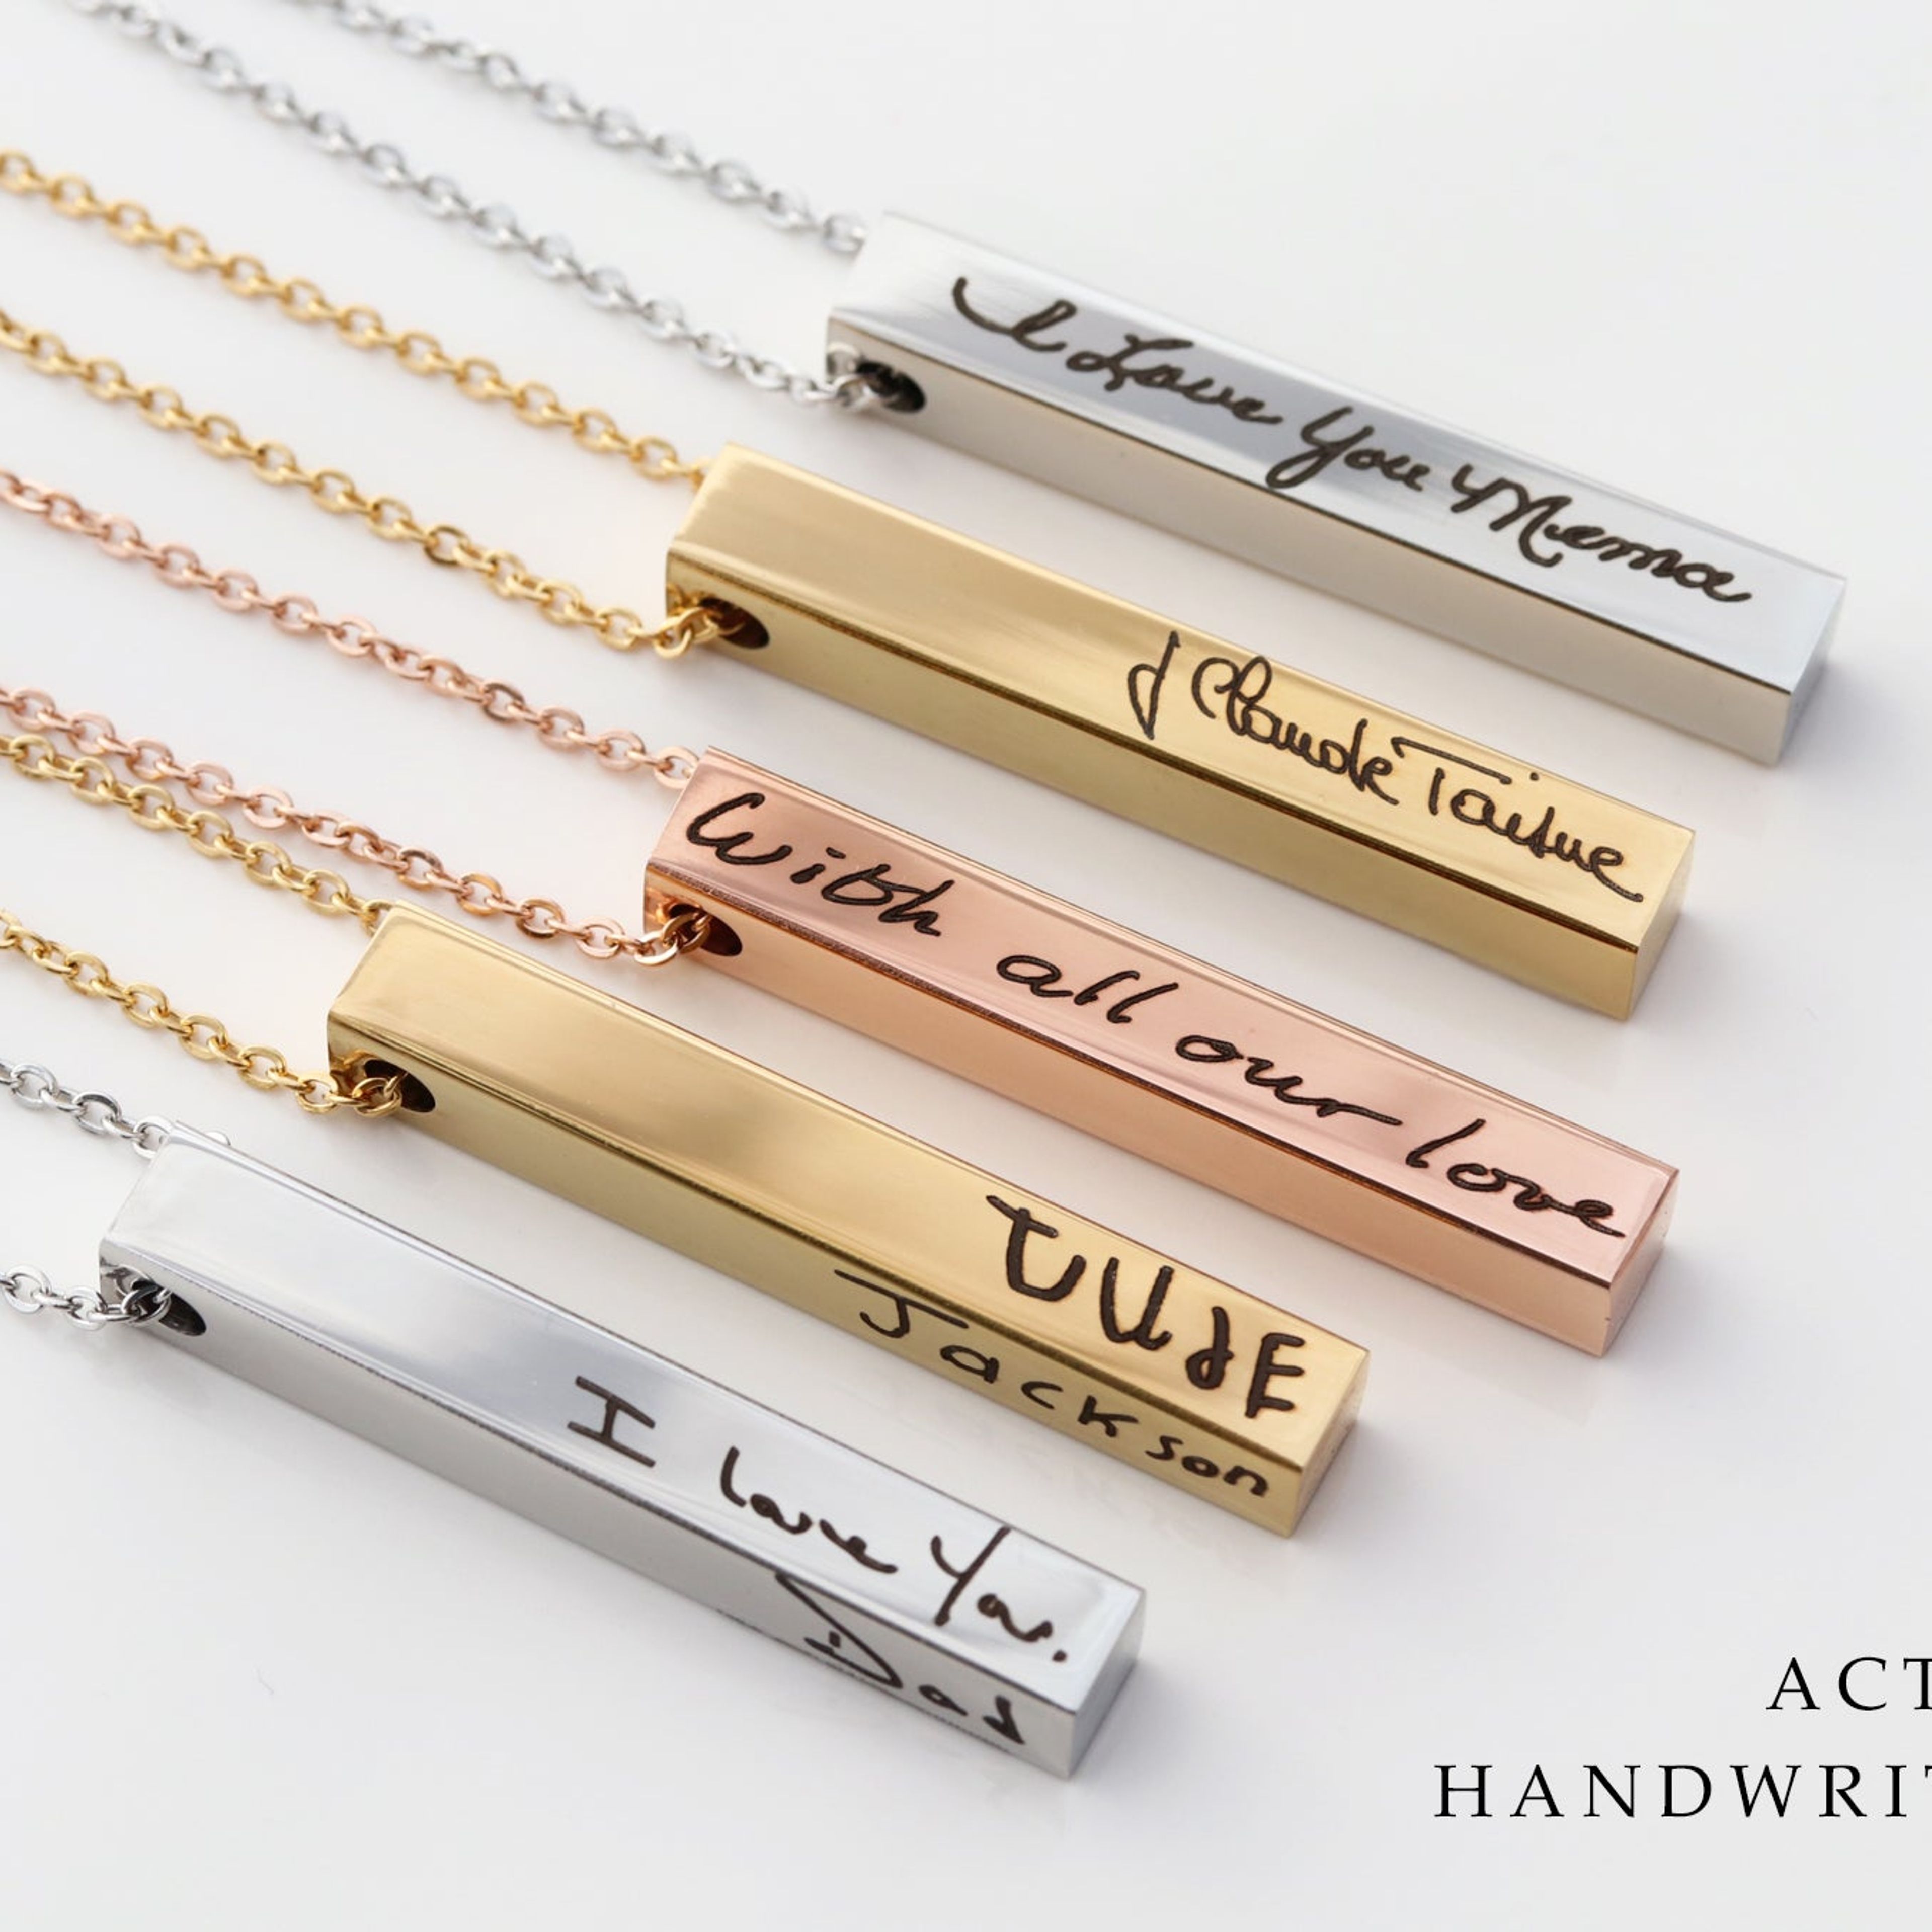 4 Sided Handwriting Bar Necklace